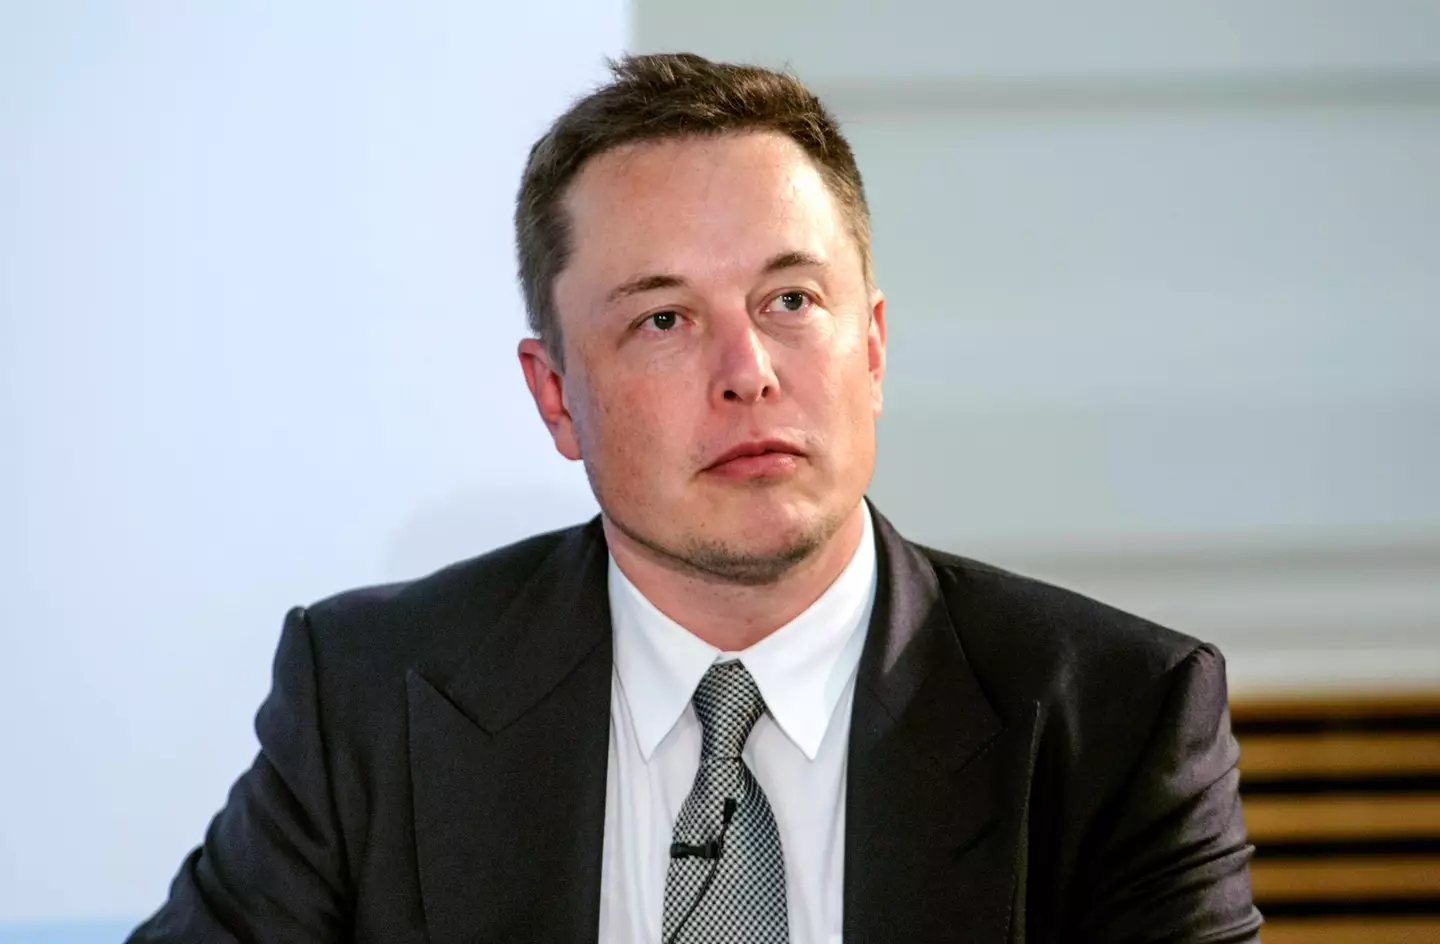 Elon Musk revealed that his newborn son tragically died in his arms.